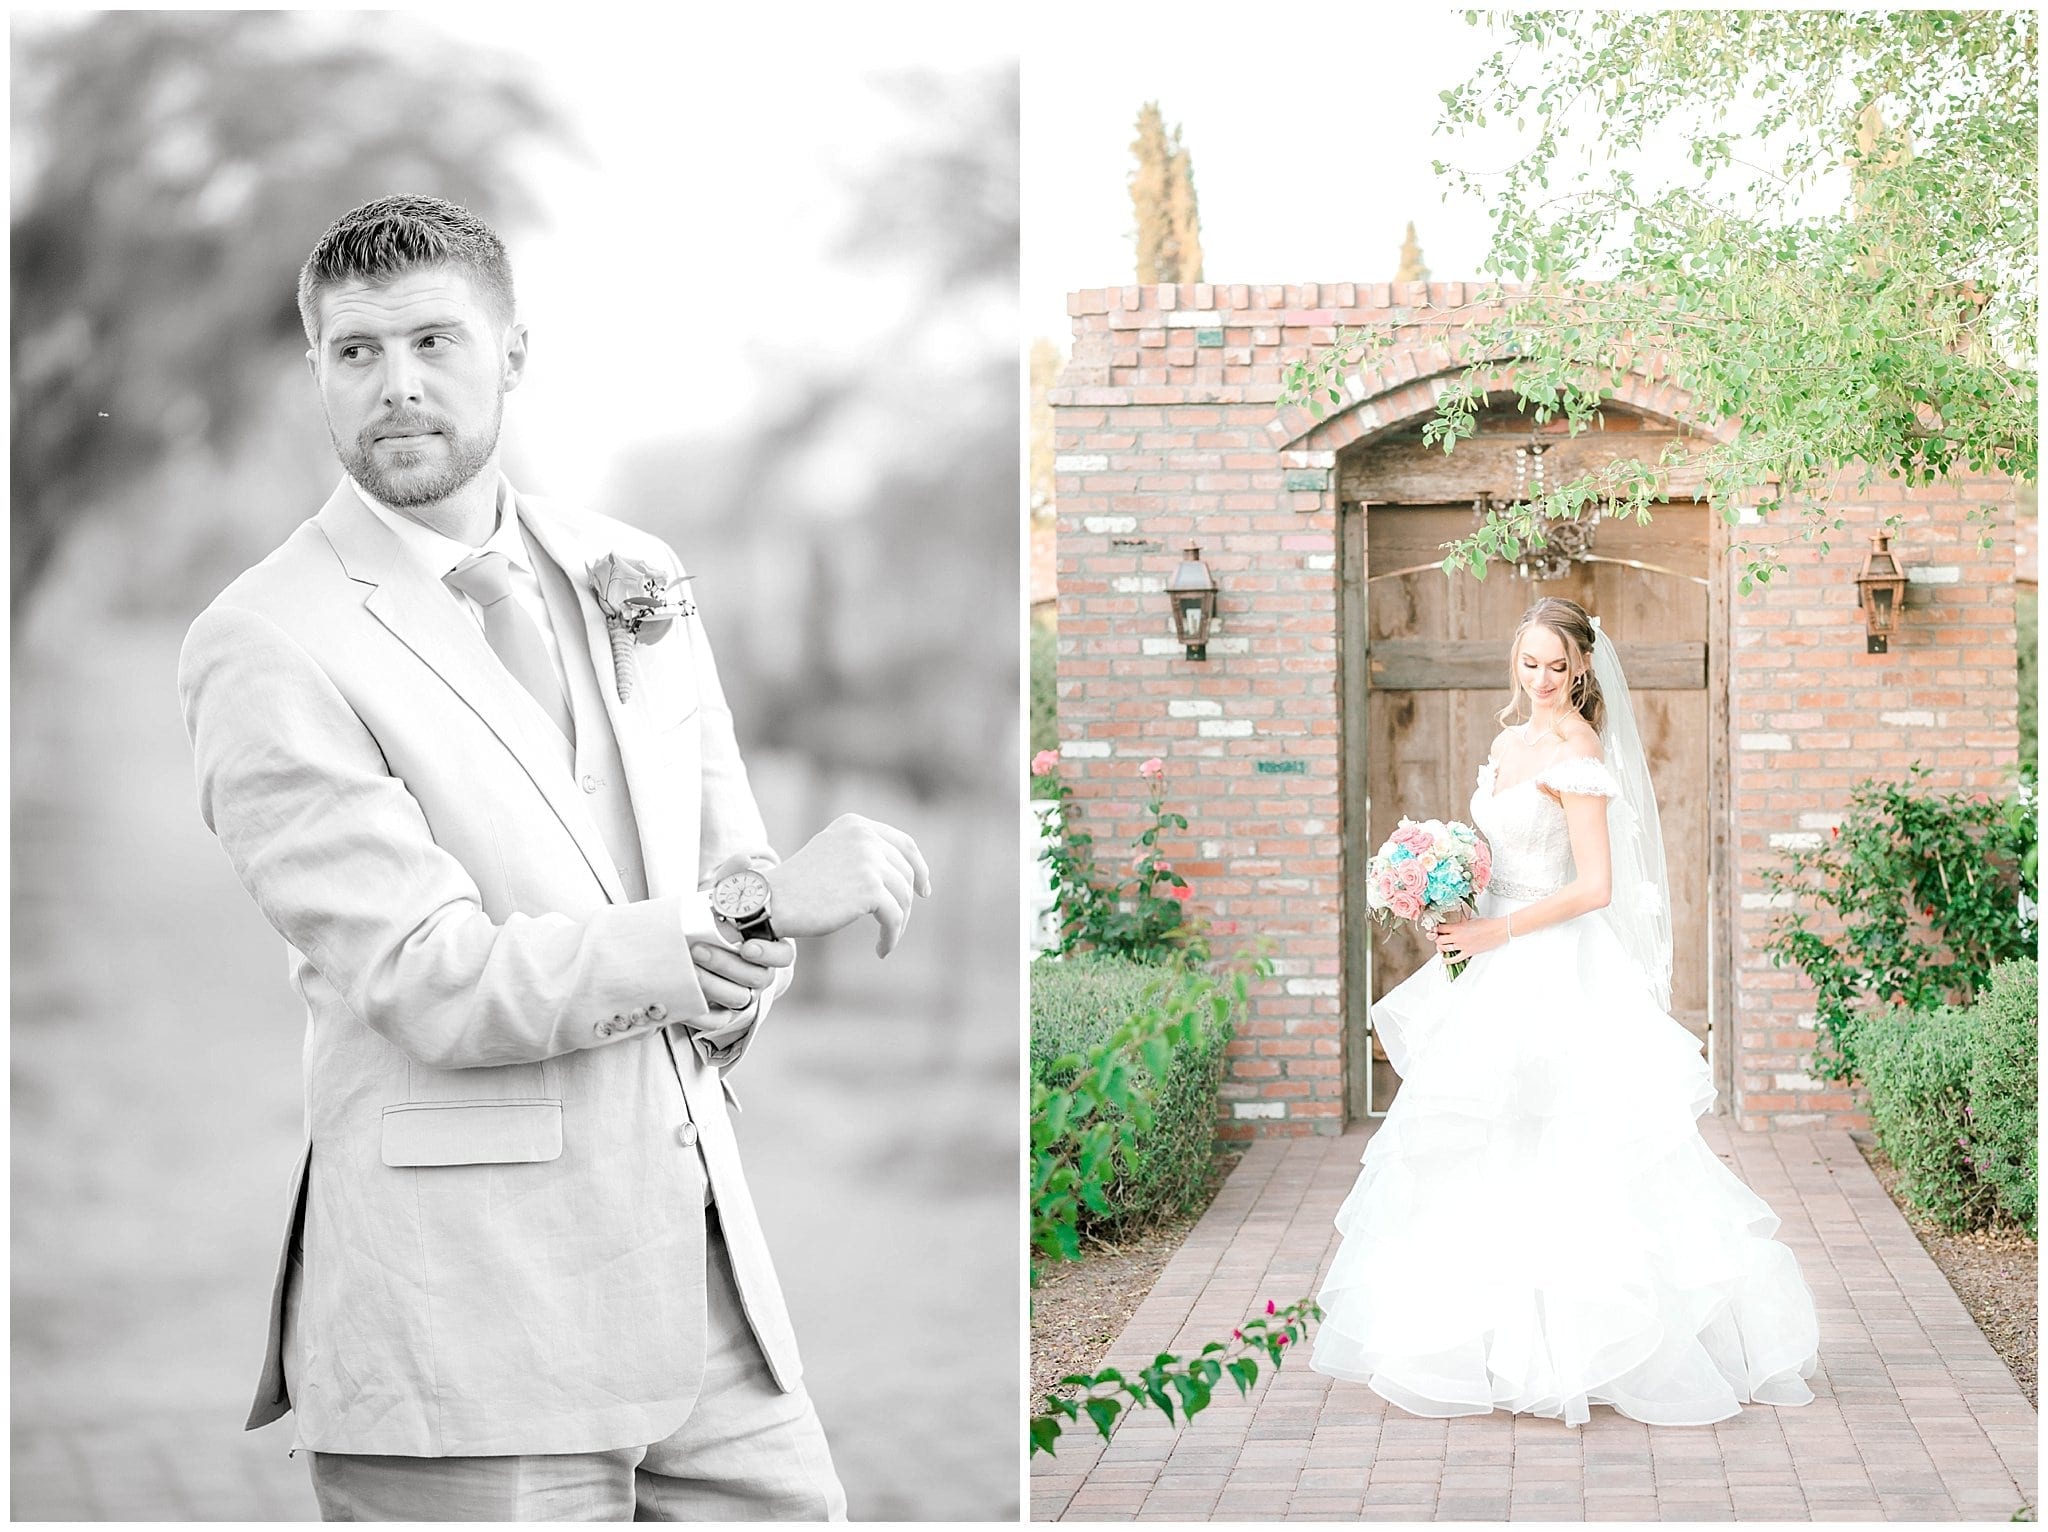 Bride and Groom Portrait at Windmill Winery